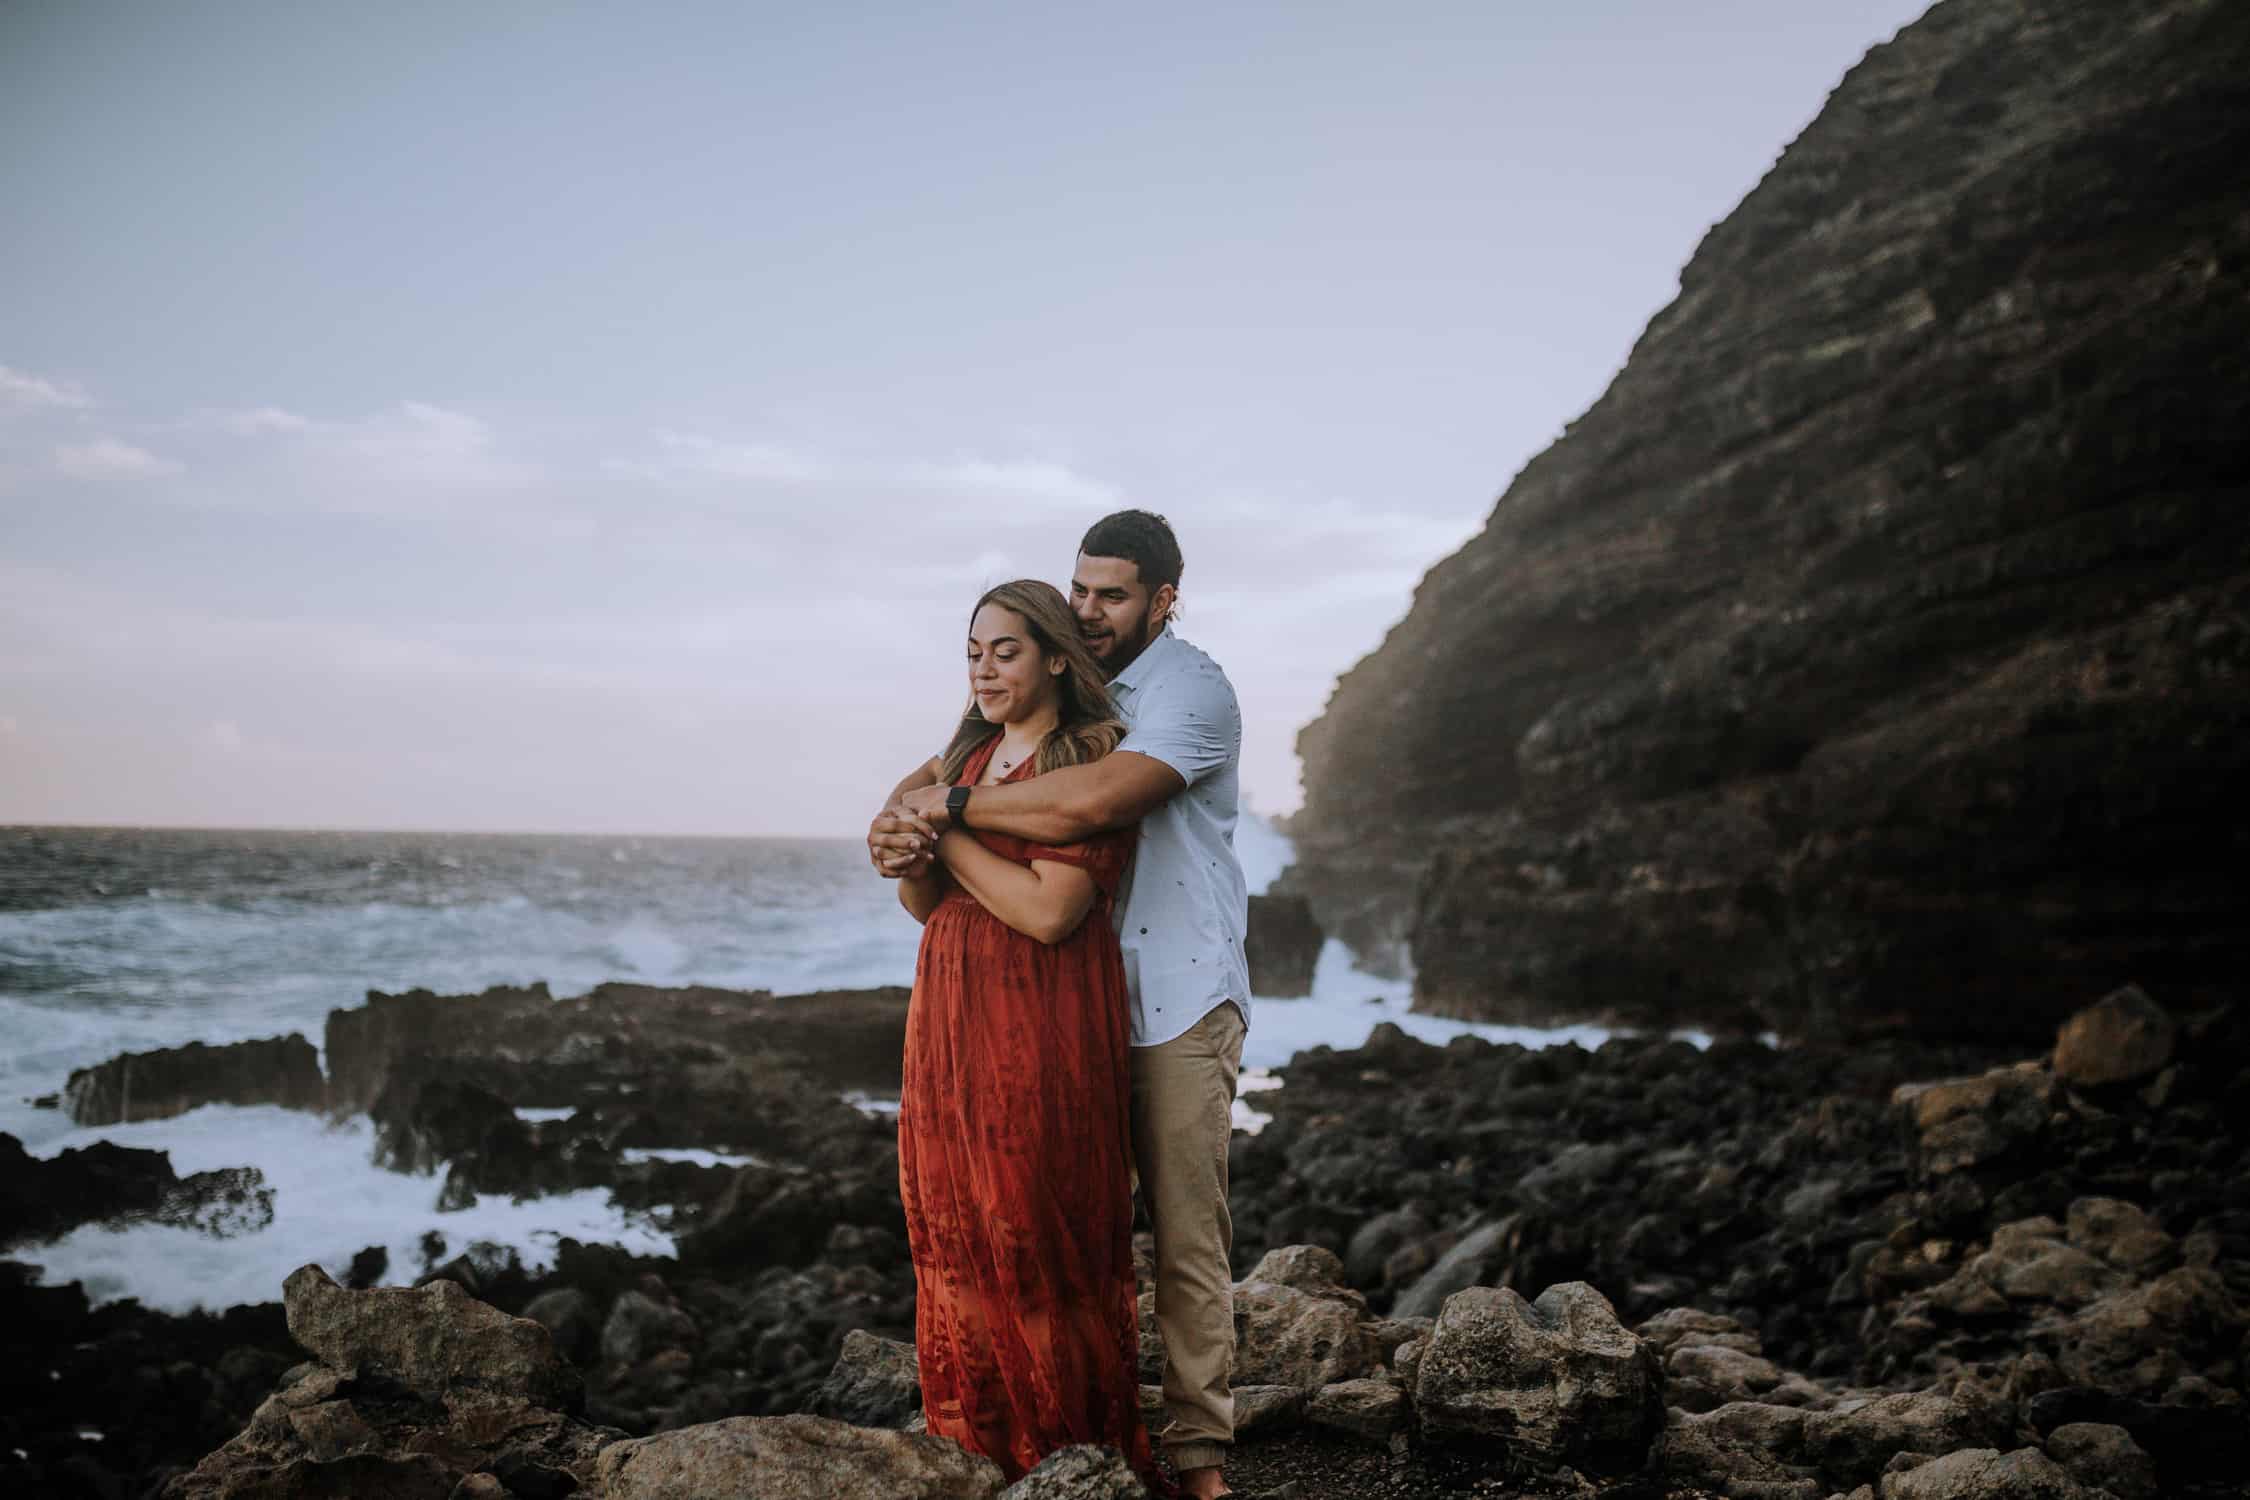 HAWAII COUPLES PHOTO PACKAGES